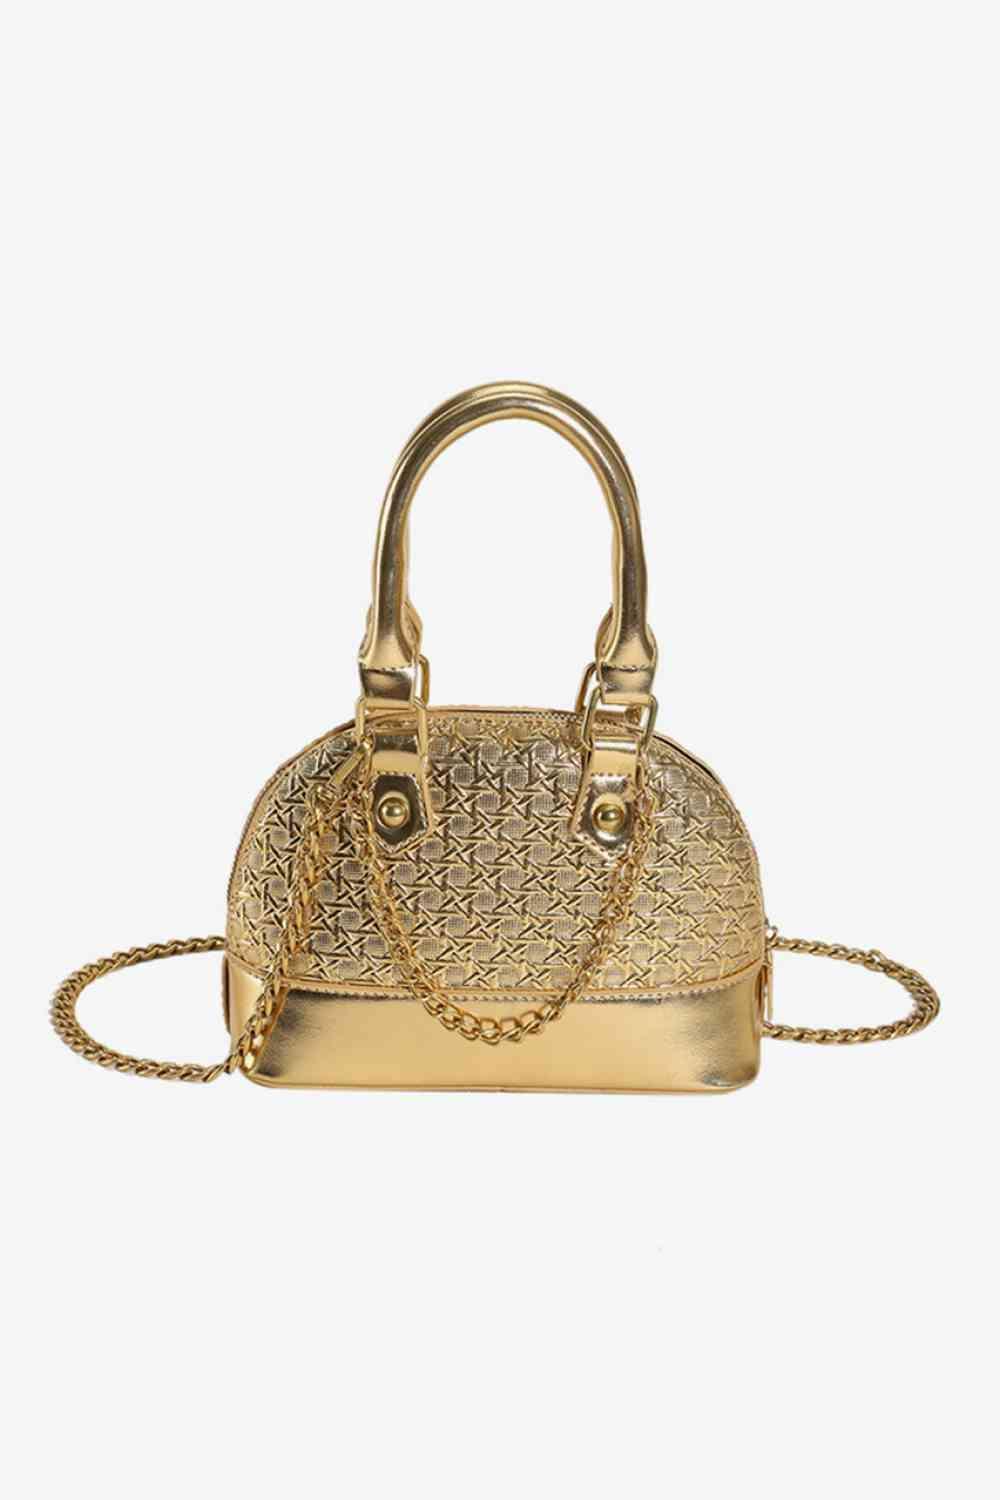 a gold purse with a chain strap